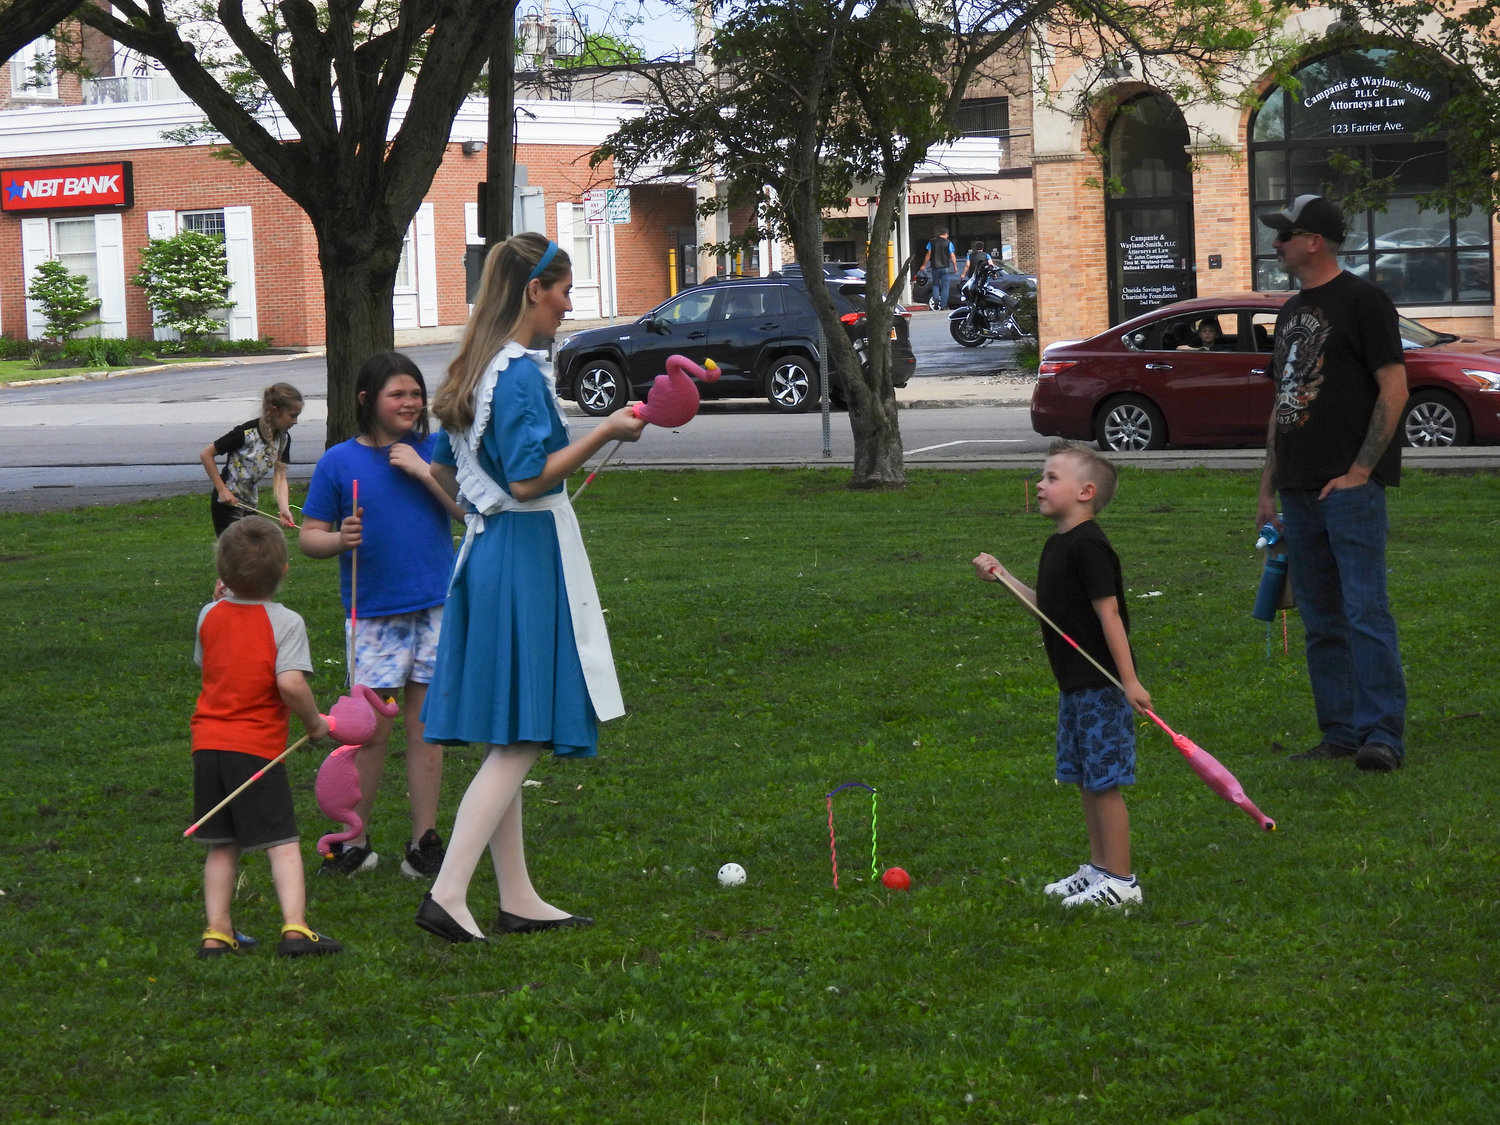 Local children play flamingo croquet with Alice, recreating a scene from "Alice in Wonderland" as part of the Oneida Parks and Recreation Department's "Through the Looking Glass" event, with members of the Bogardus Performing Art Center take the role of beloved characters.